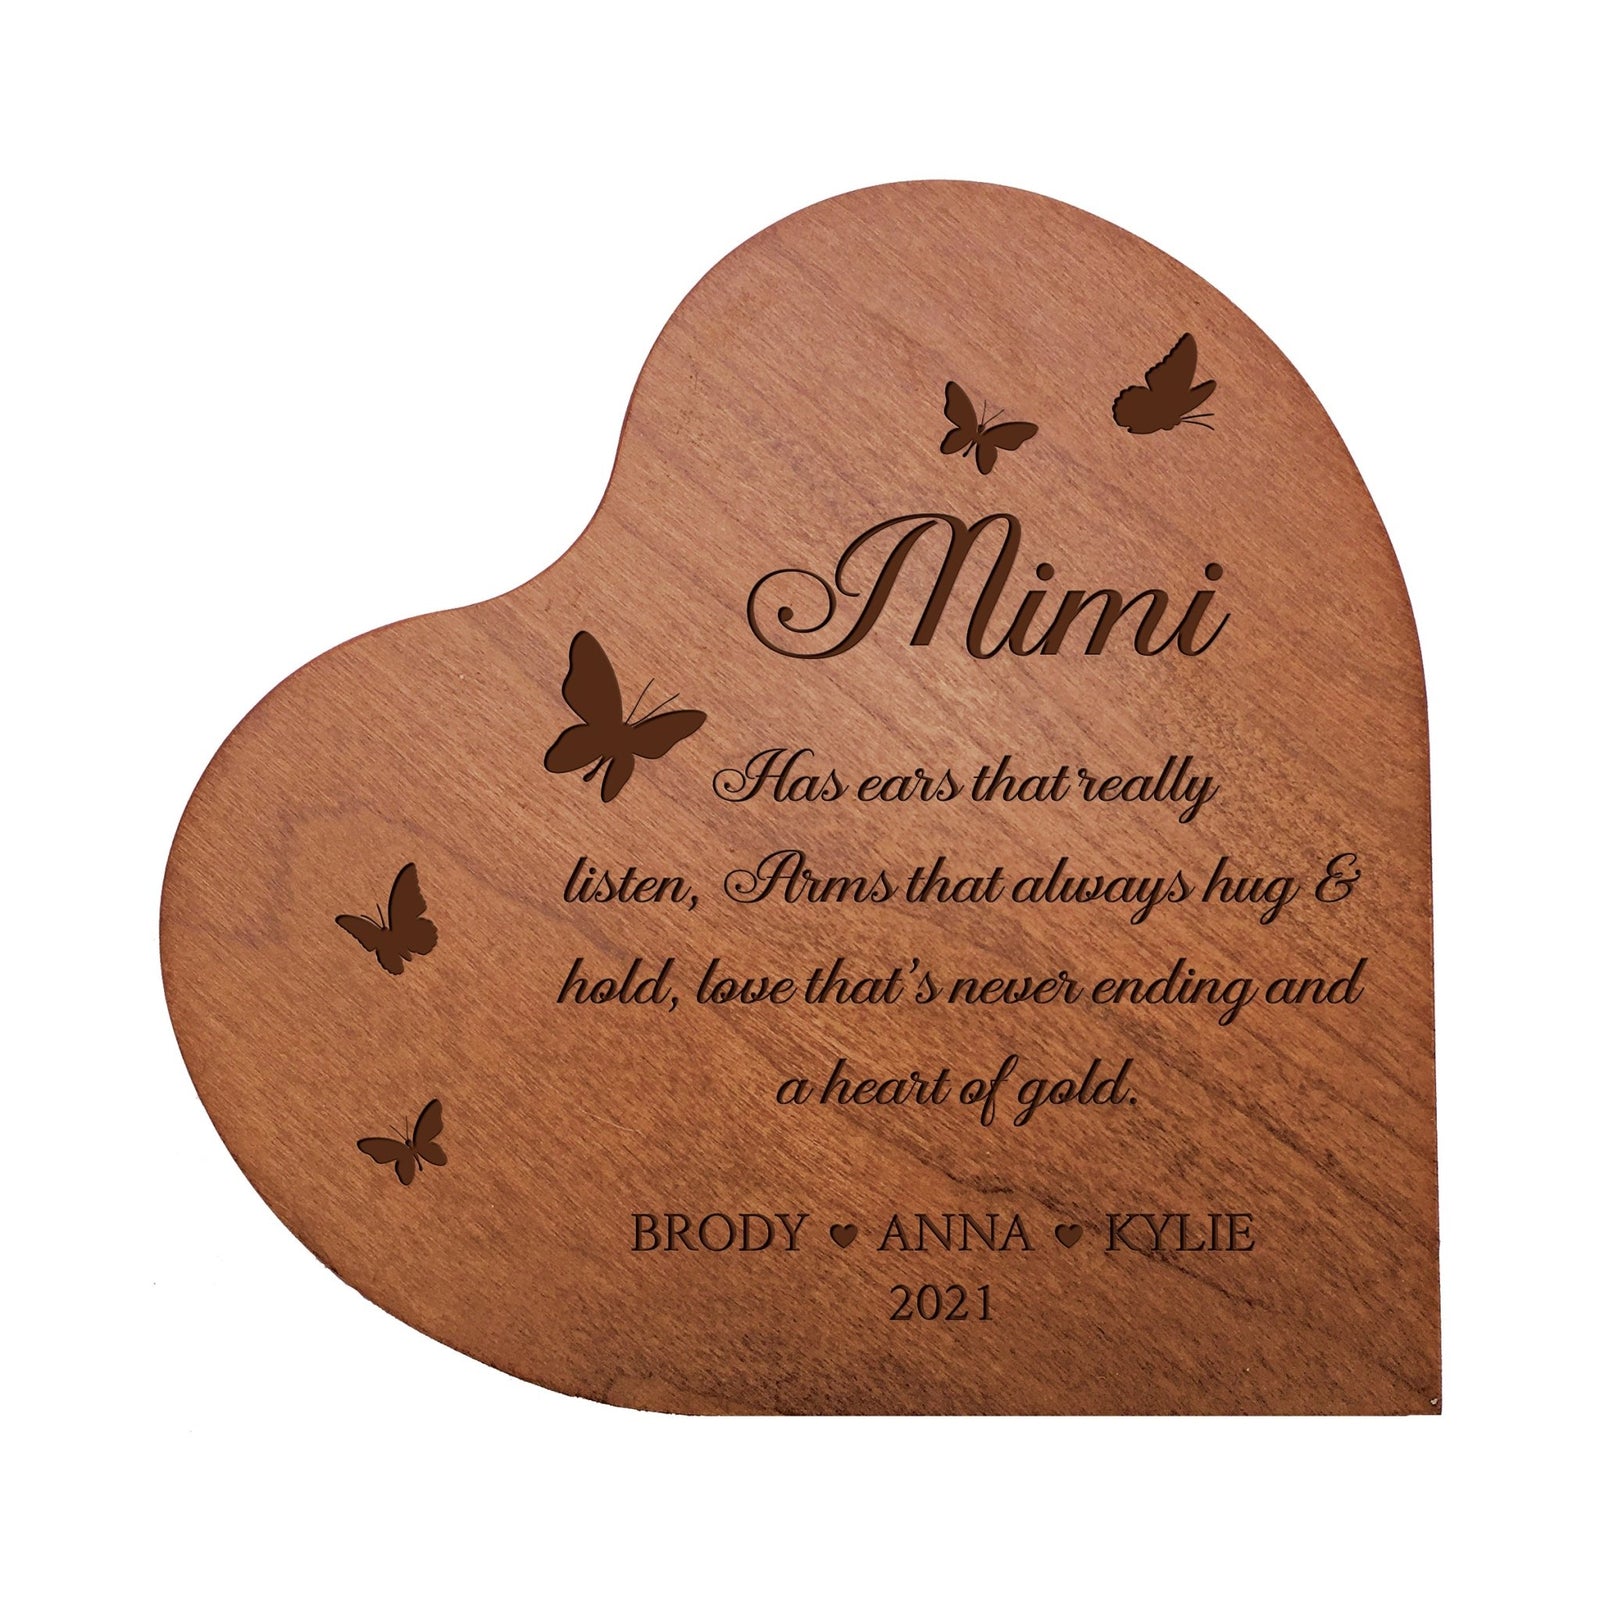 Personalized Modern Mimi’s Love Solid Wood Heart Decoration With Inspirational Verse Keepsake Gift 5x5.25 - Mimi Has Ears That Really = Hug & Hold - LifeSong Milestones